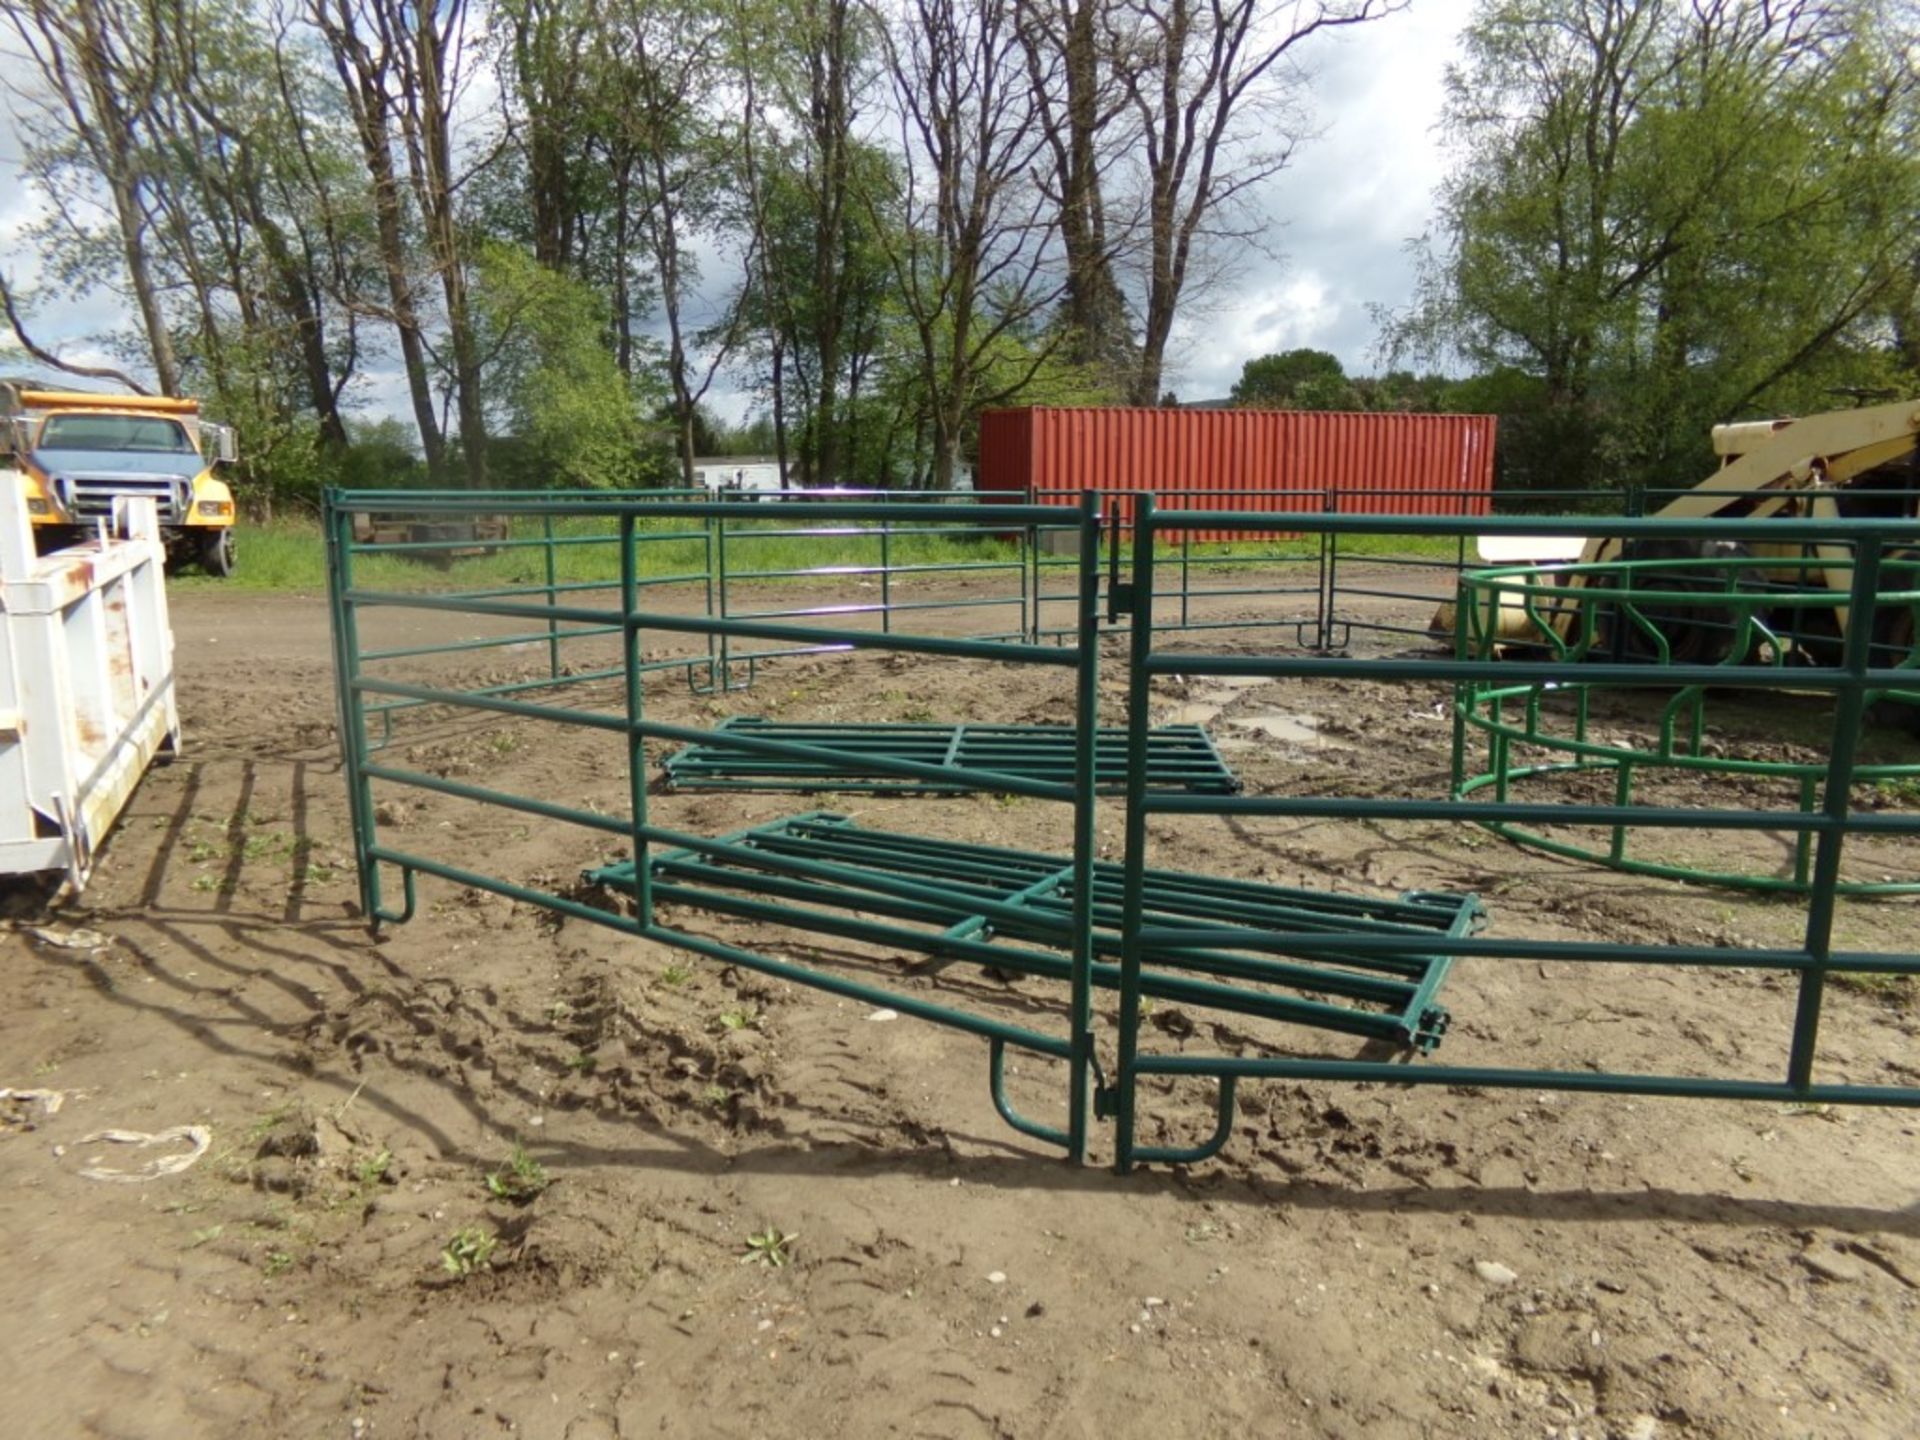 Green 10 Panel 5 Bar Corral System, (10) 10' Gates, Interlocking -Sells As A Group - Image 2 of 2